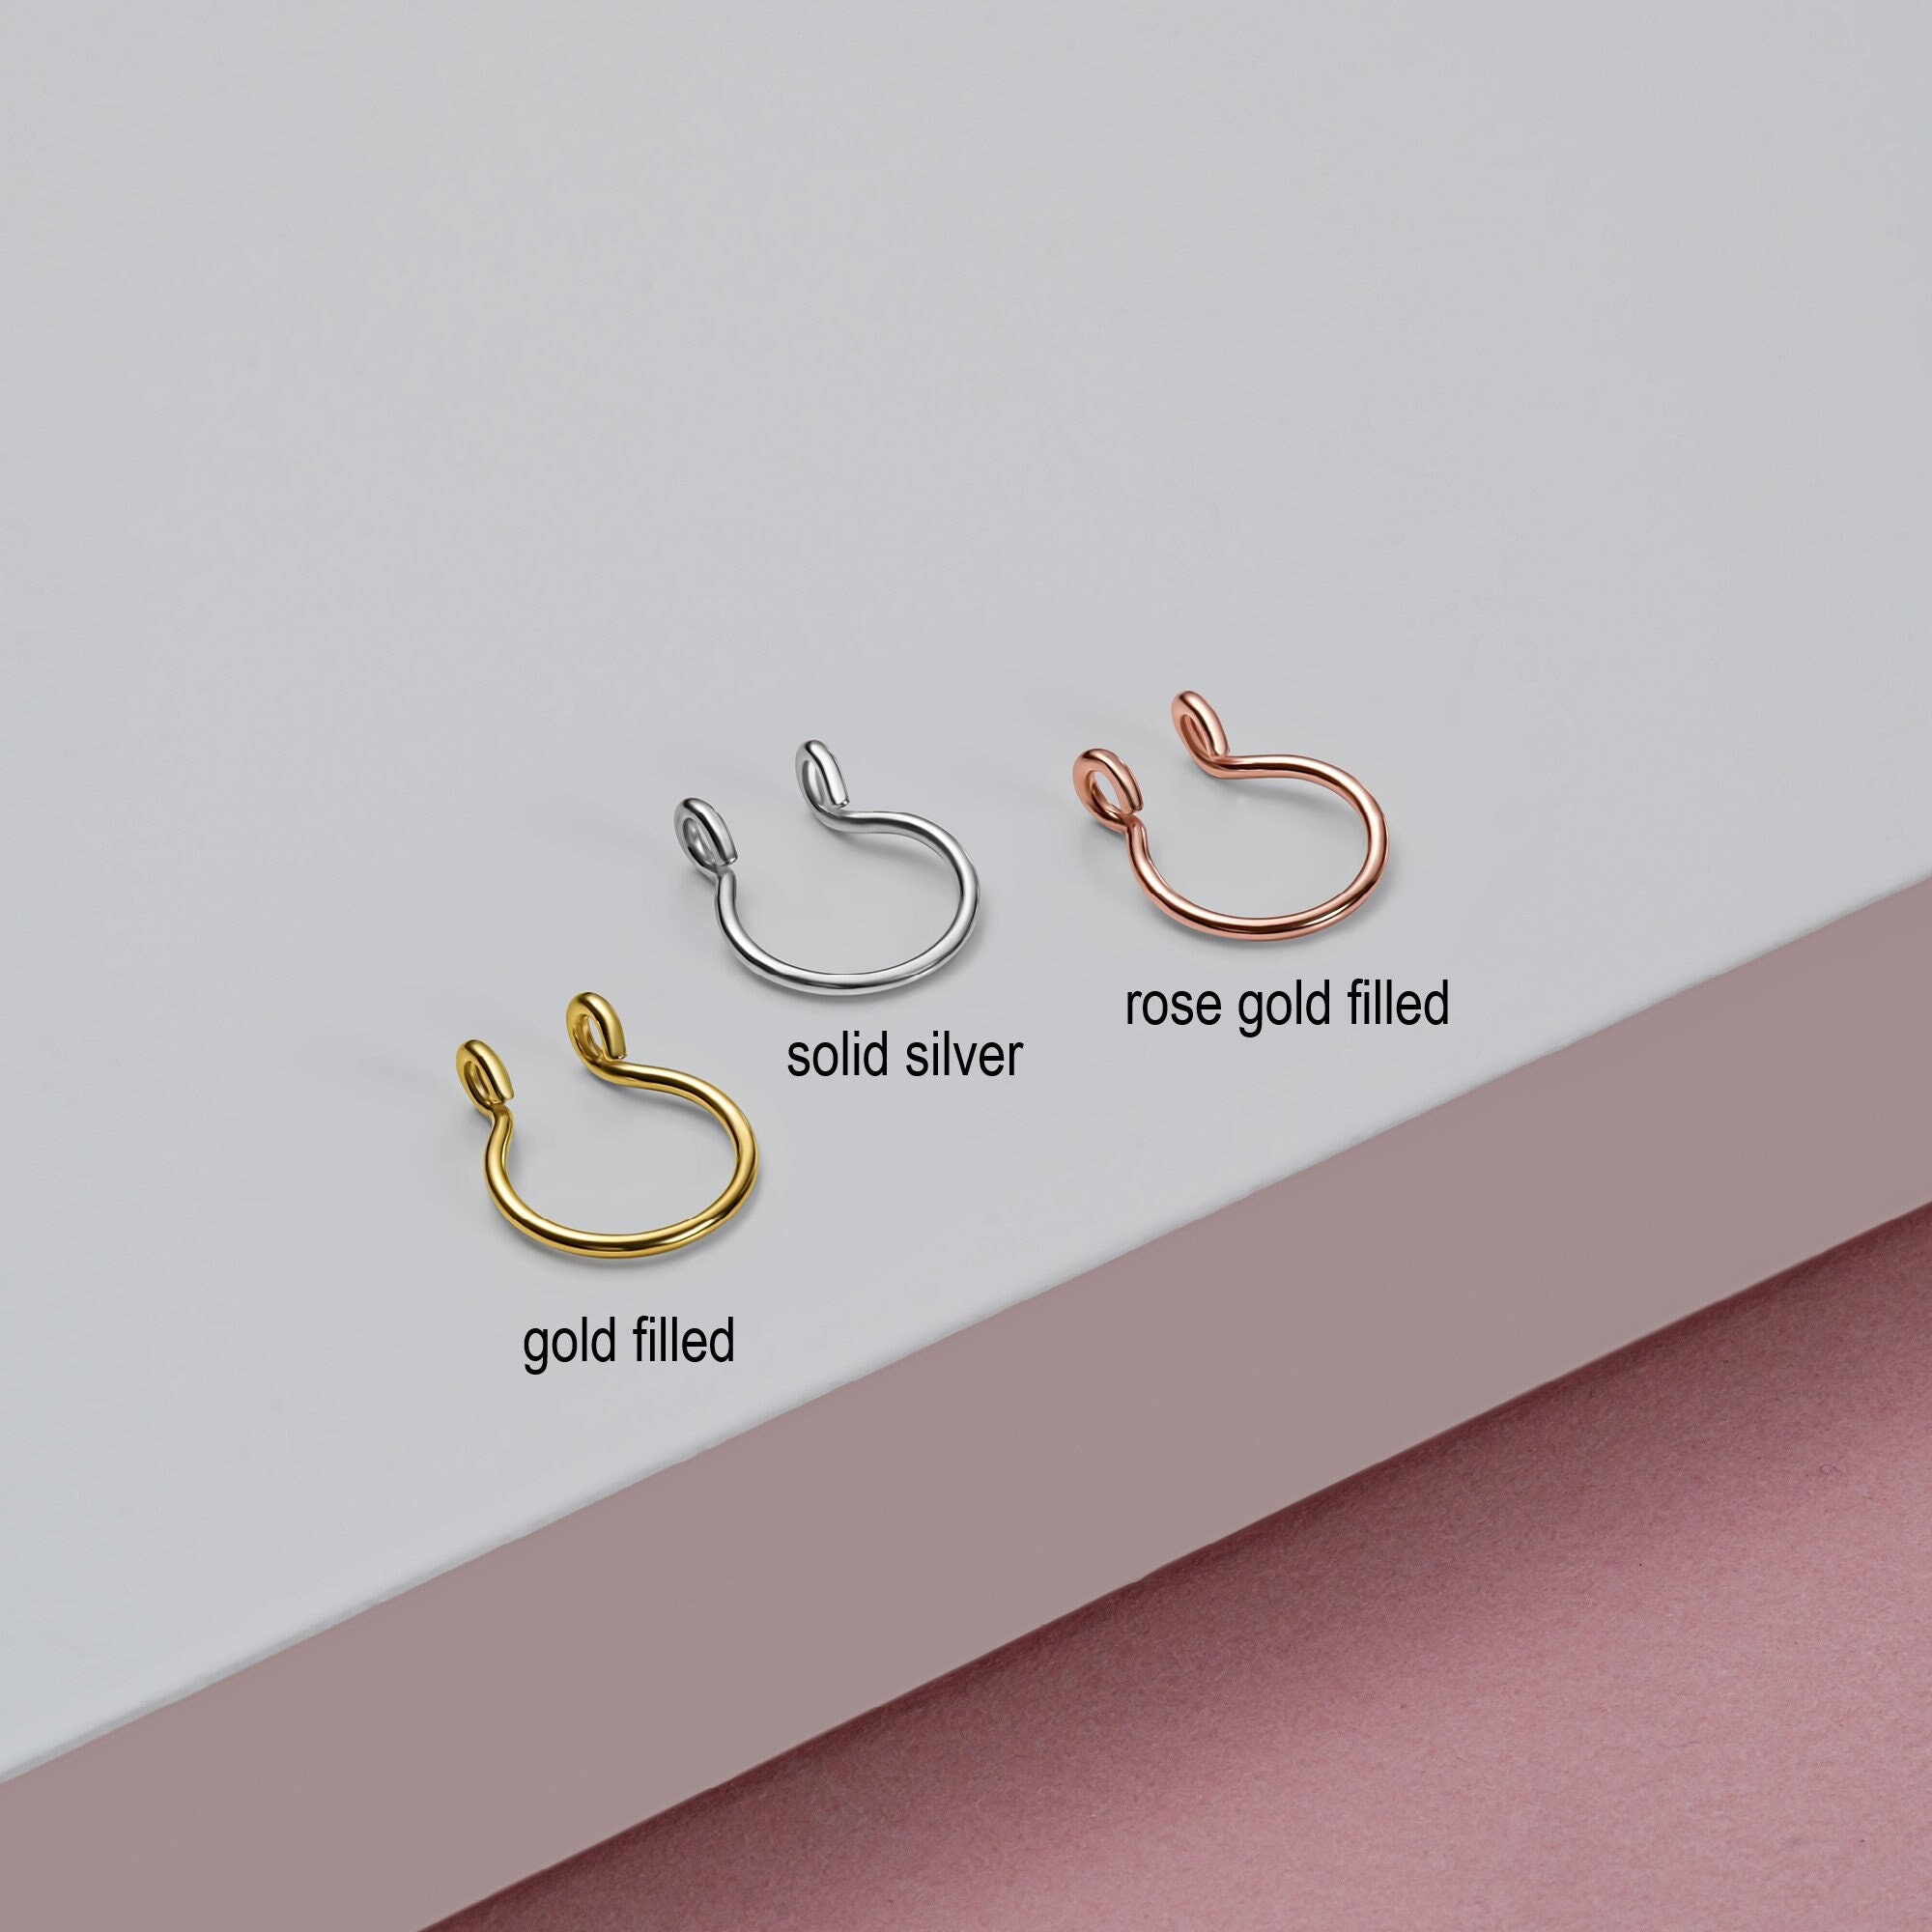 SERIES A Adjustable Fake Nose Ringno Piercing Required, Bunny Nose Ring,  Non Piercing Nose Ring, Faux Nose Ring, Festival Body Jewelry 